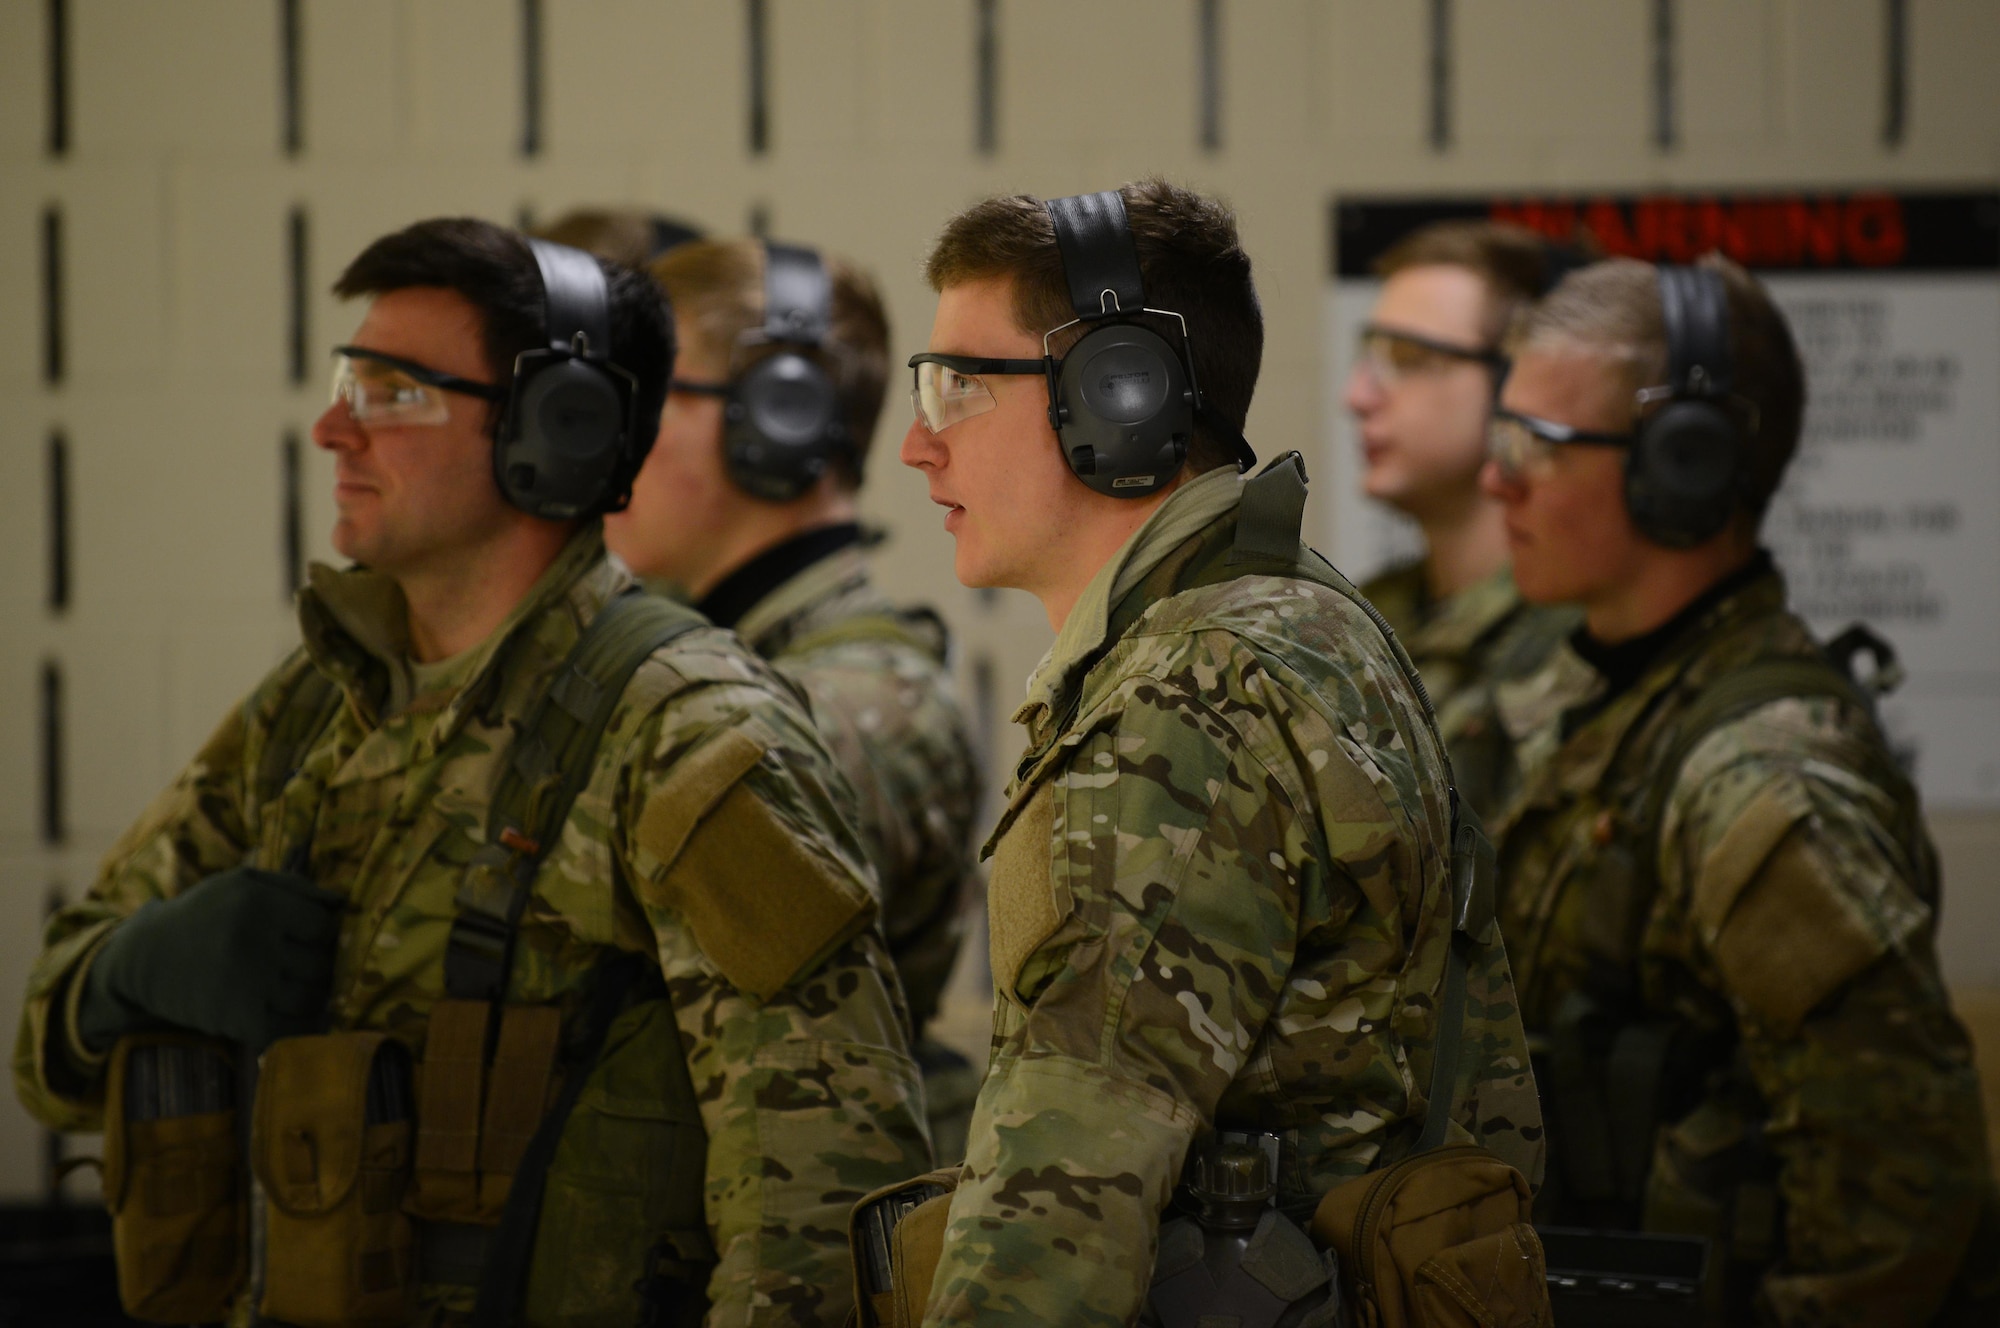 U.S. Air Force Combat Control trainees assigned to Operating Location C, 342nd Training Squadron, await their turn to shoot at Pope Army Airfield, North Carolina, Feb. 11, 2015. Before being assigned to a unit, CCT and Special Operations Weather Team trainees have to complete a rigorous training pipeline which can take approximately two years. (U.S. Air Force photo by Airman 1st Class Michael Cossaboom)